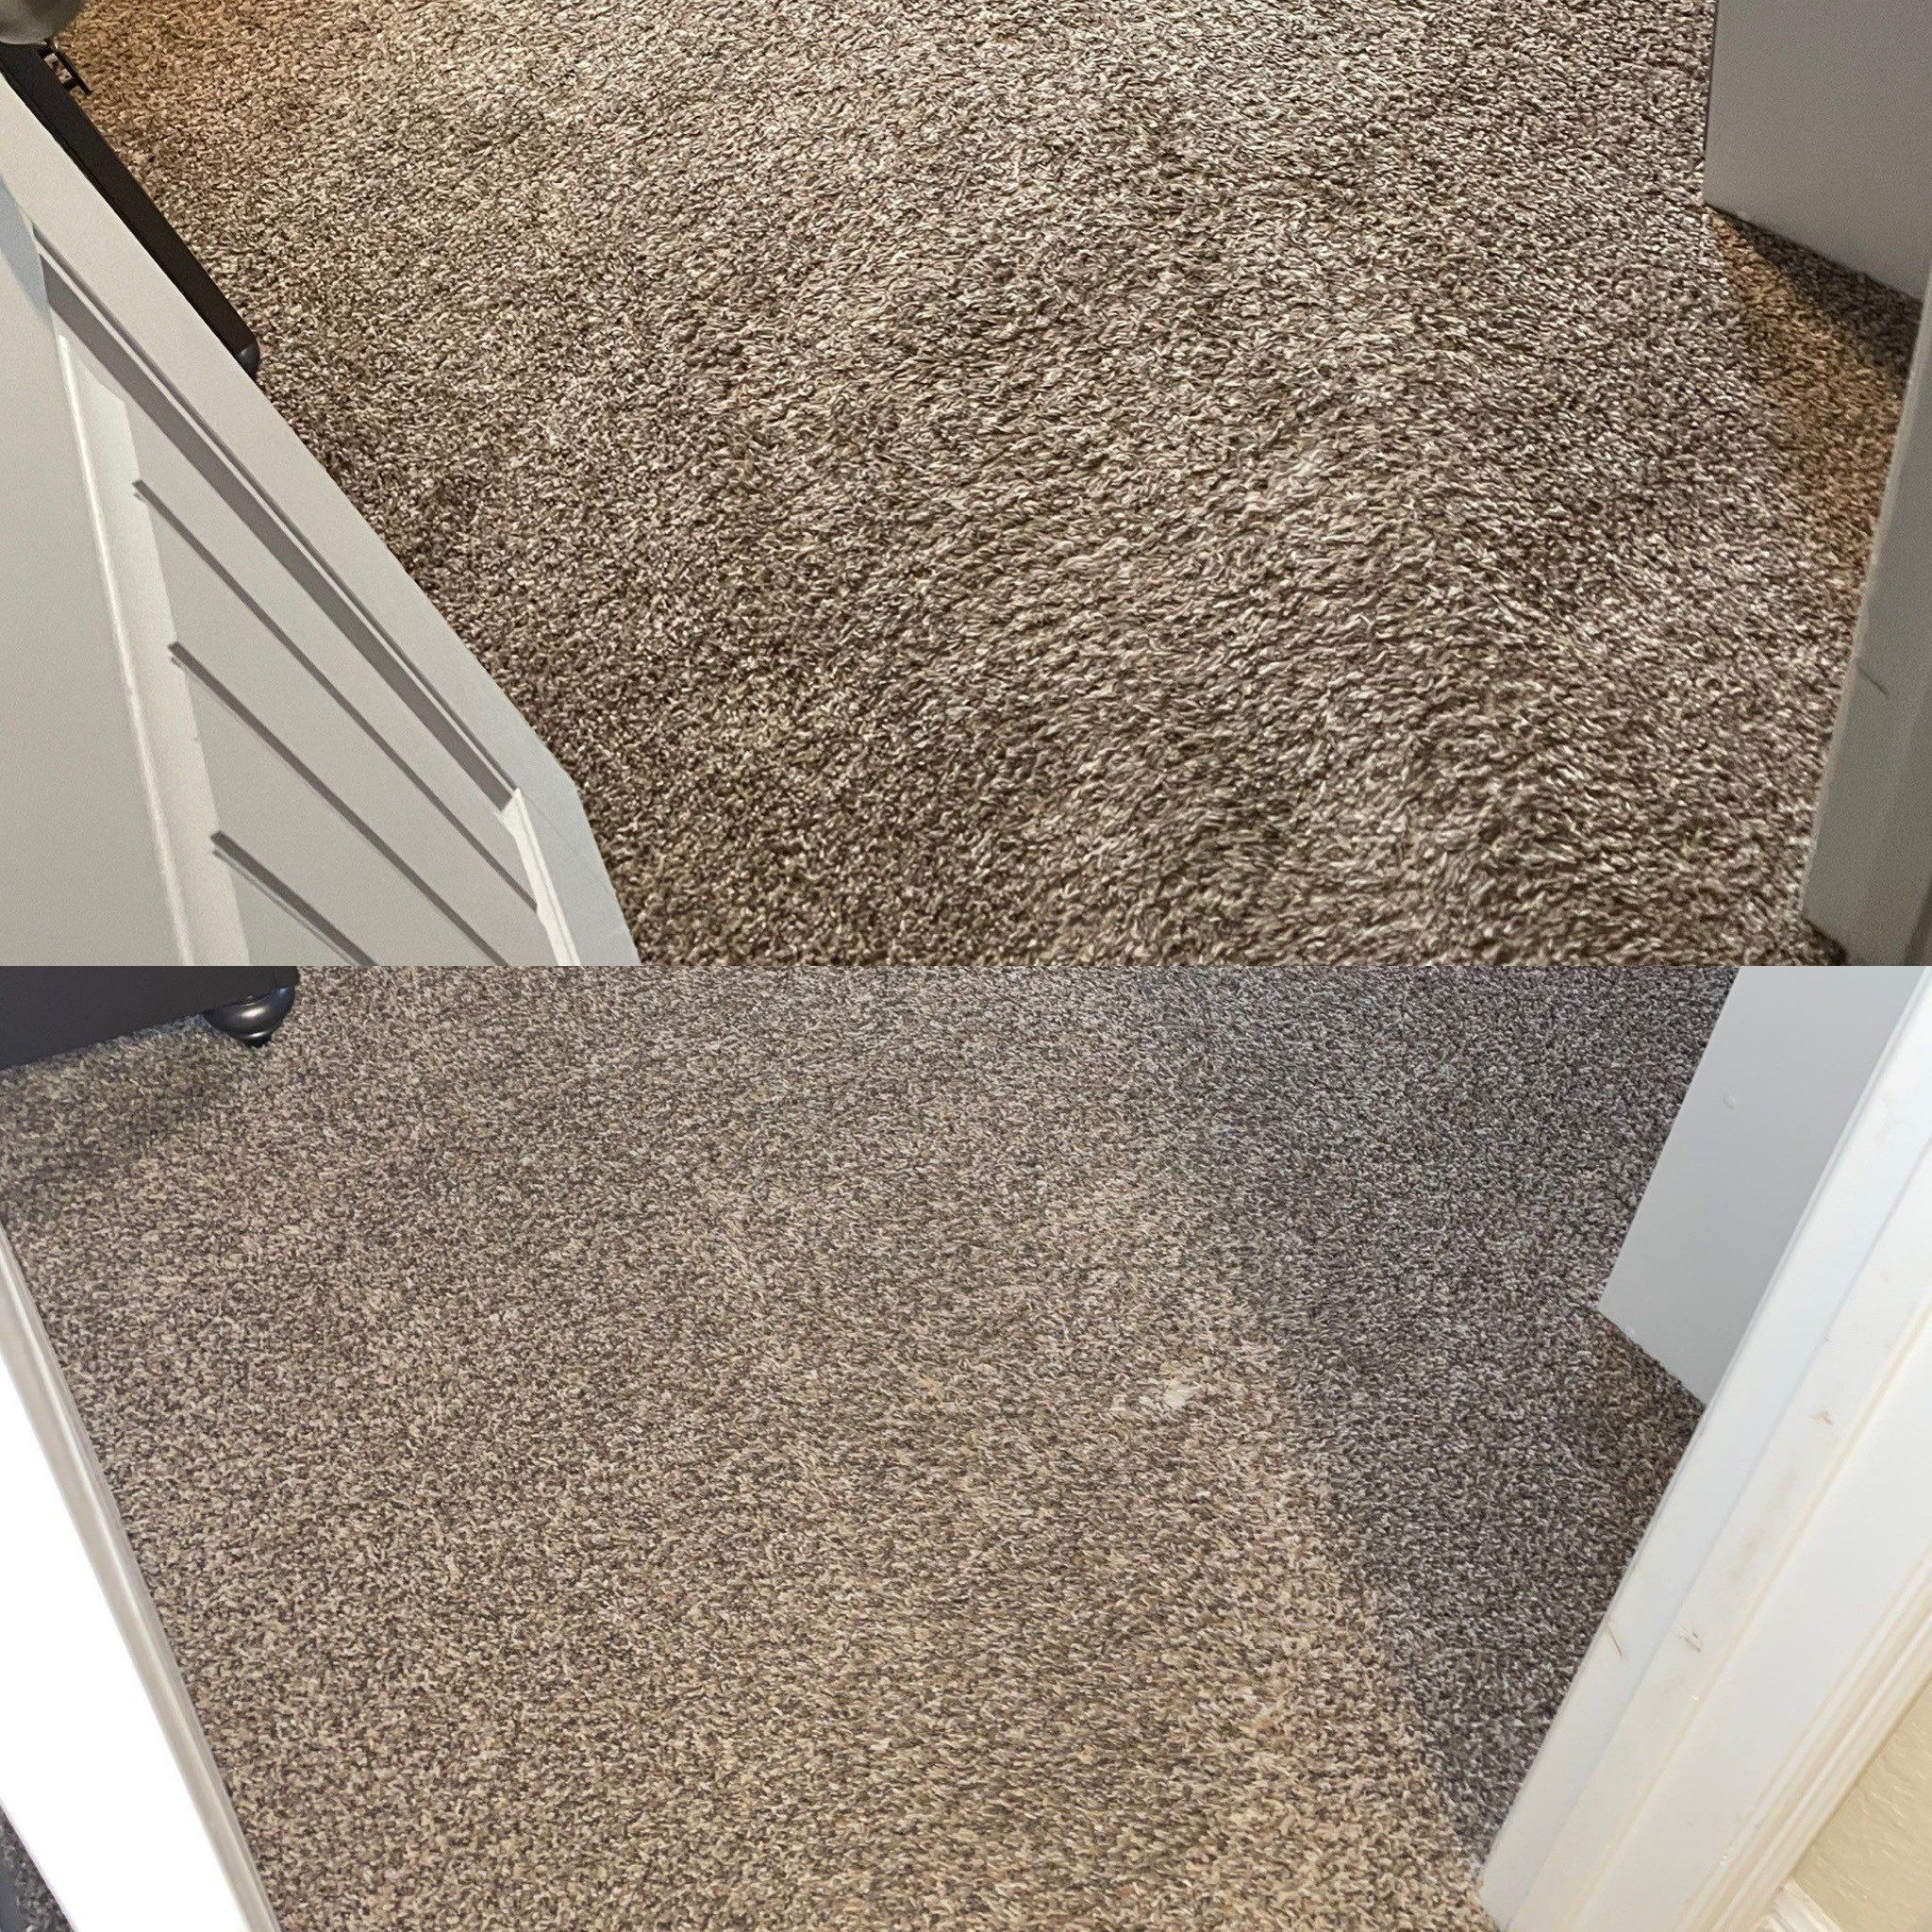 carpet cleaning before after dirt removal stain extraction deep clean fresher look san antonio company service